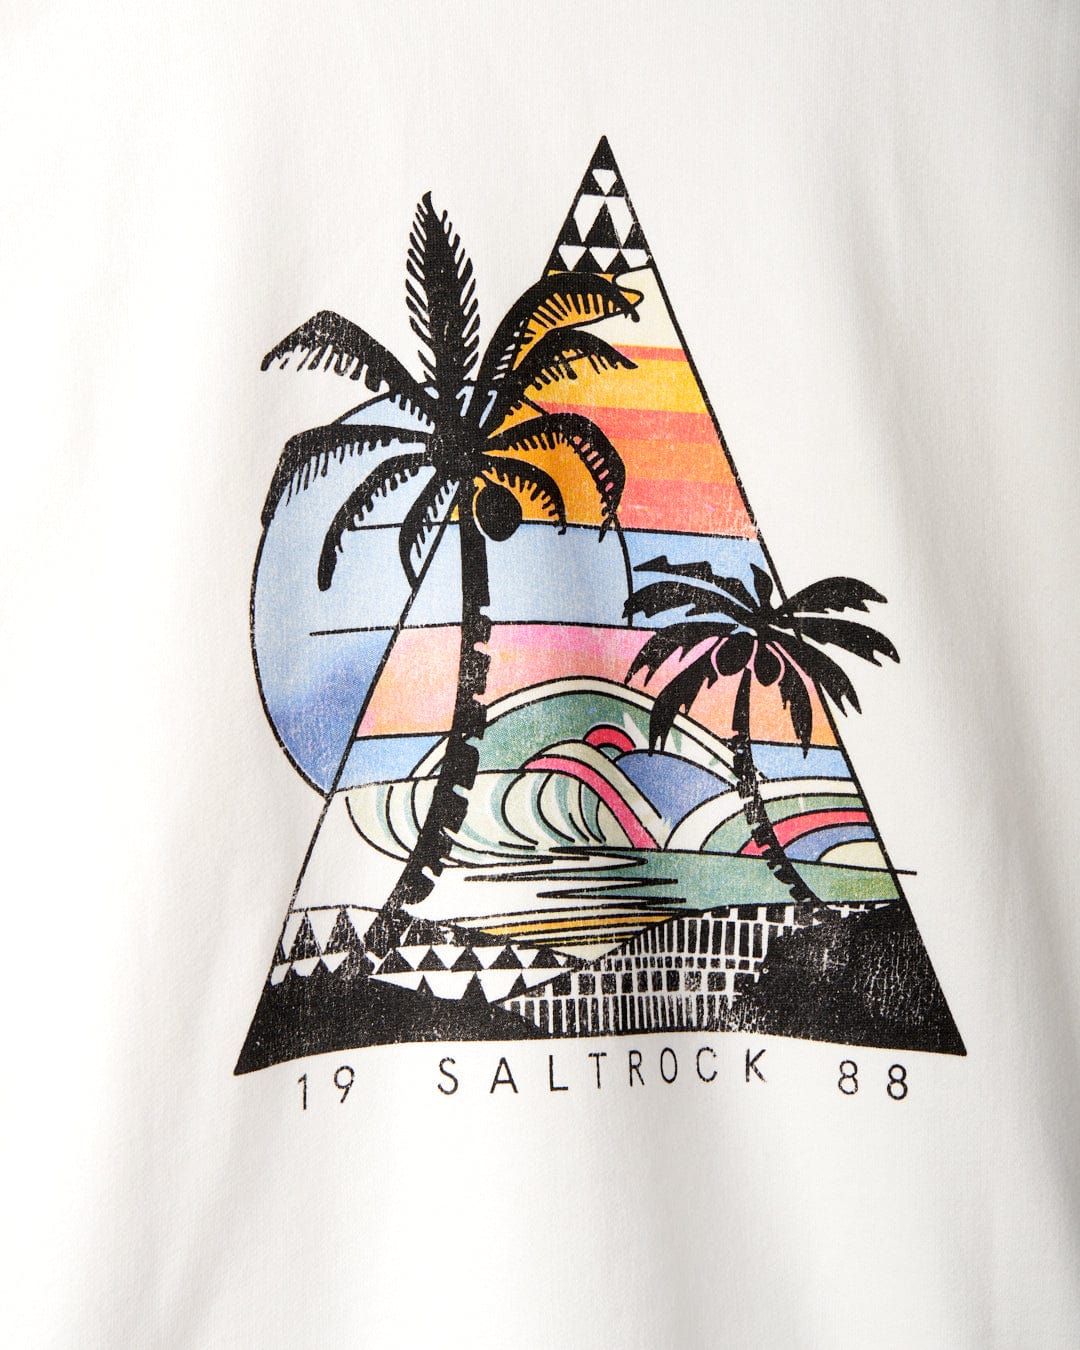 Graphic of palm trees and ocean waves within a triangle, featuring a colorful sunset backdrop. Text below reads "Geo Beach - Womens Pop Hoodie - White" with signature Saltrock branding.